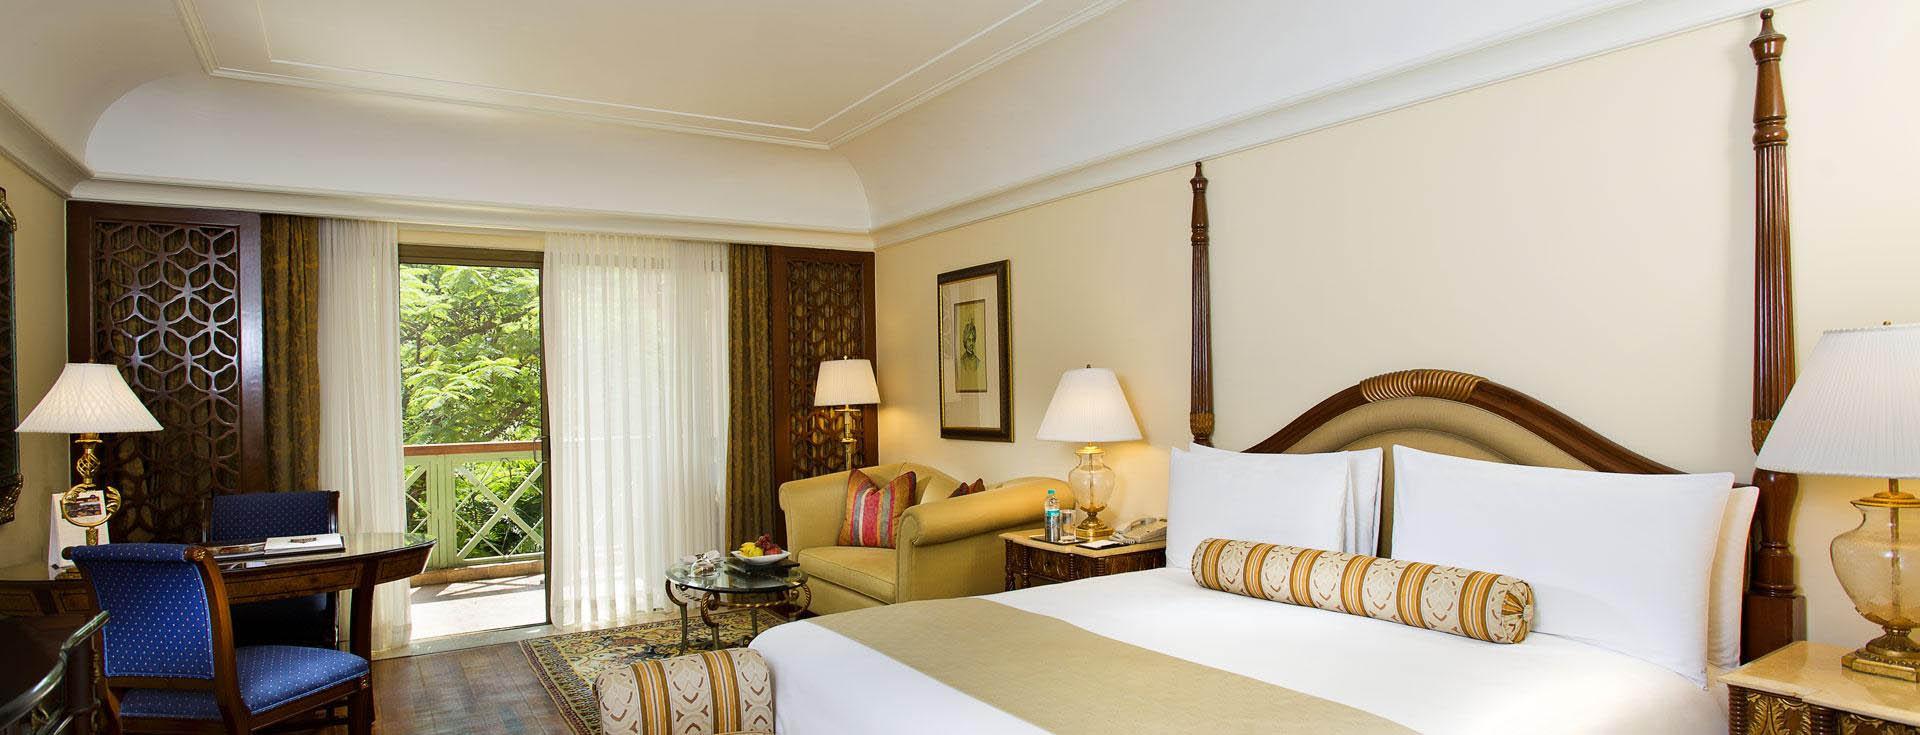 Bed and Breakfast offer at The Leela Palace Bengaluru